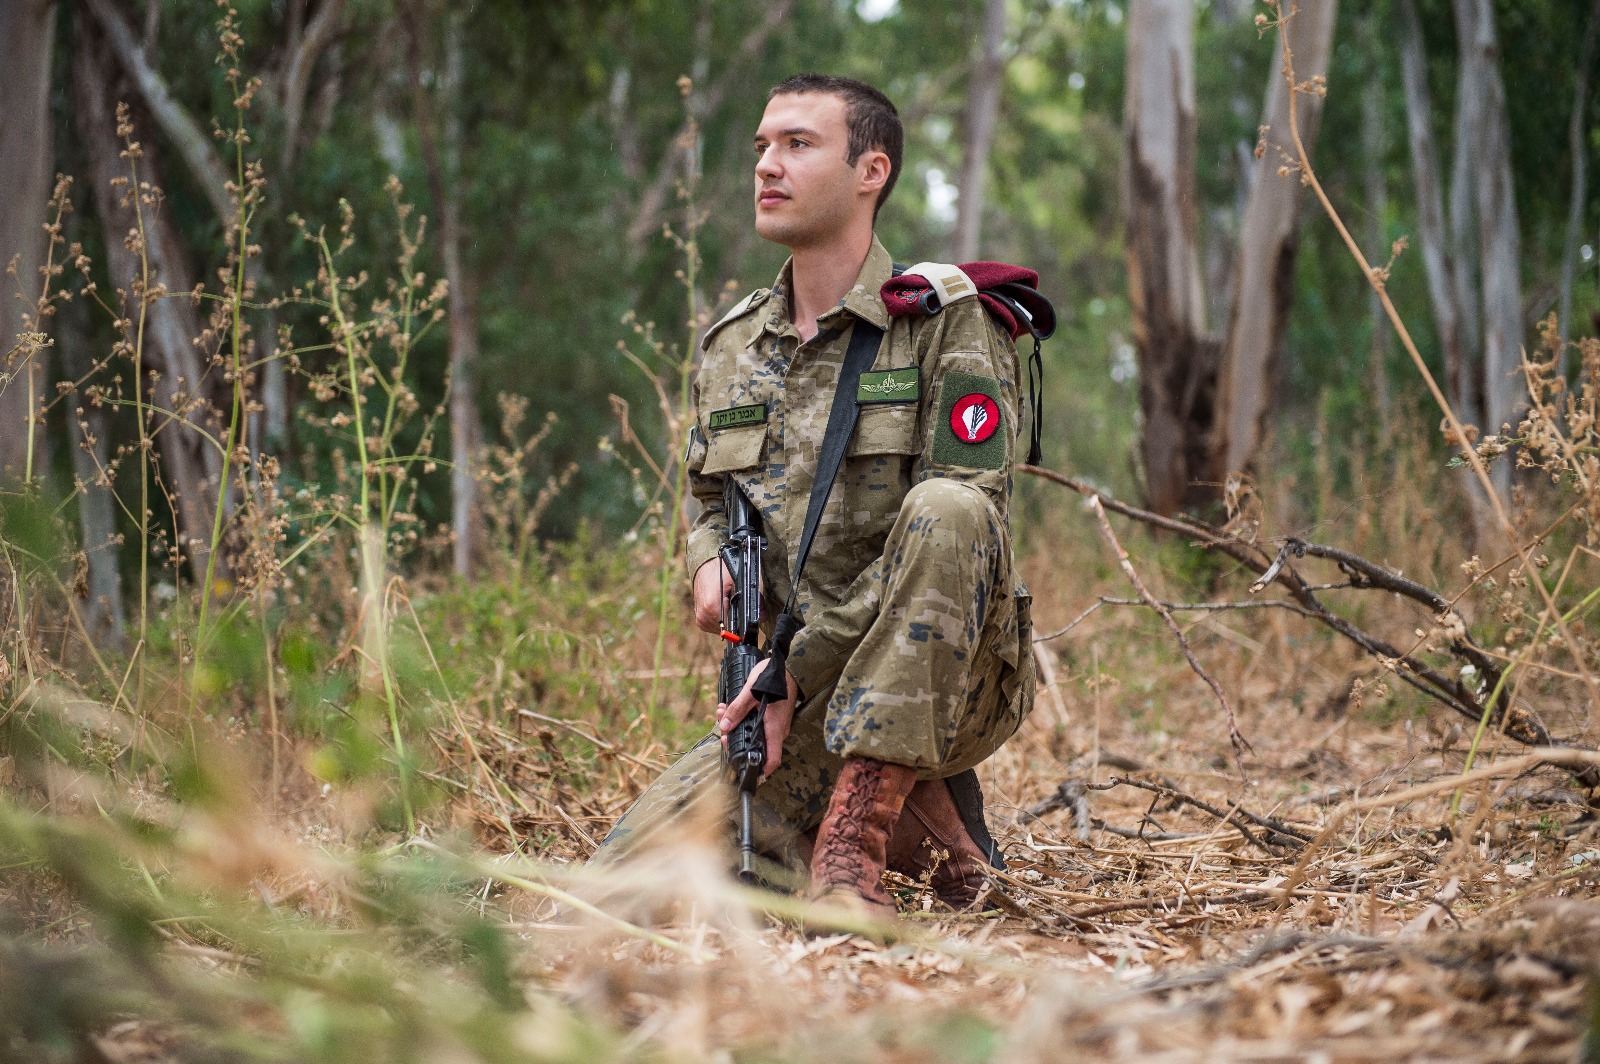 IDF try out new camo uniforms to replace drab green ones | The Times of ...